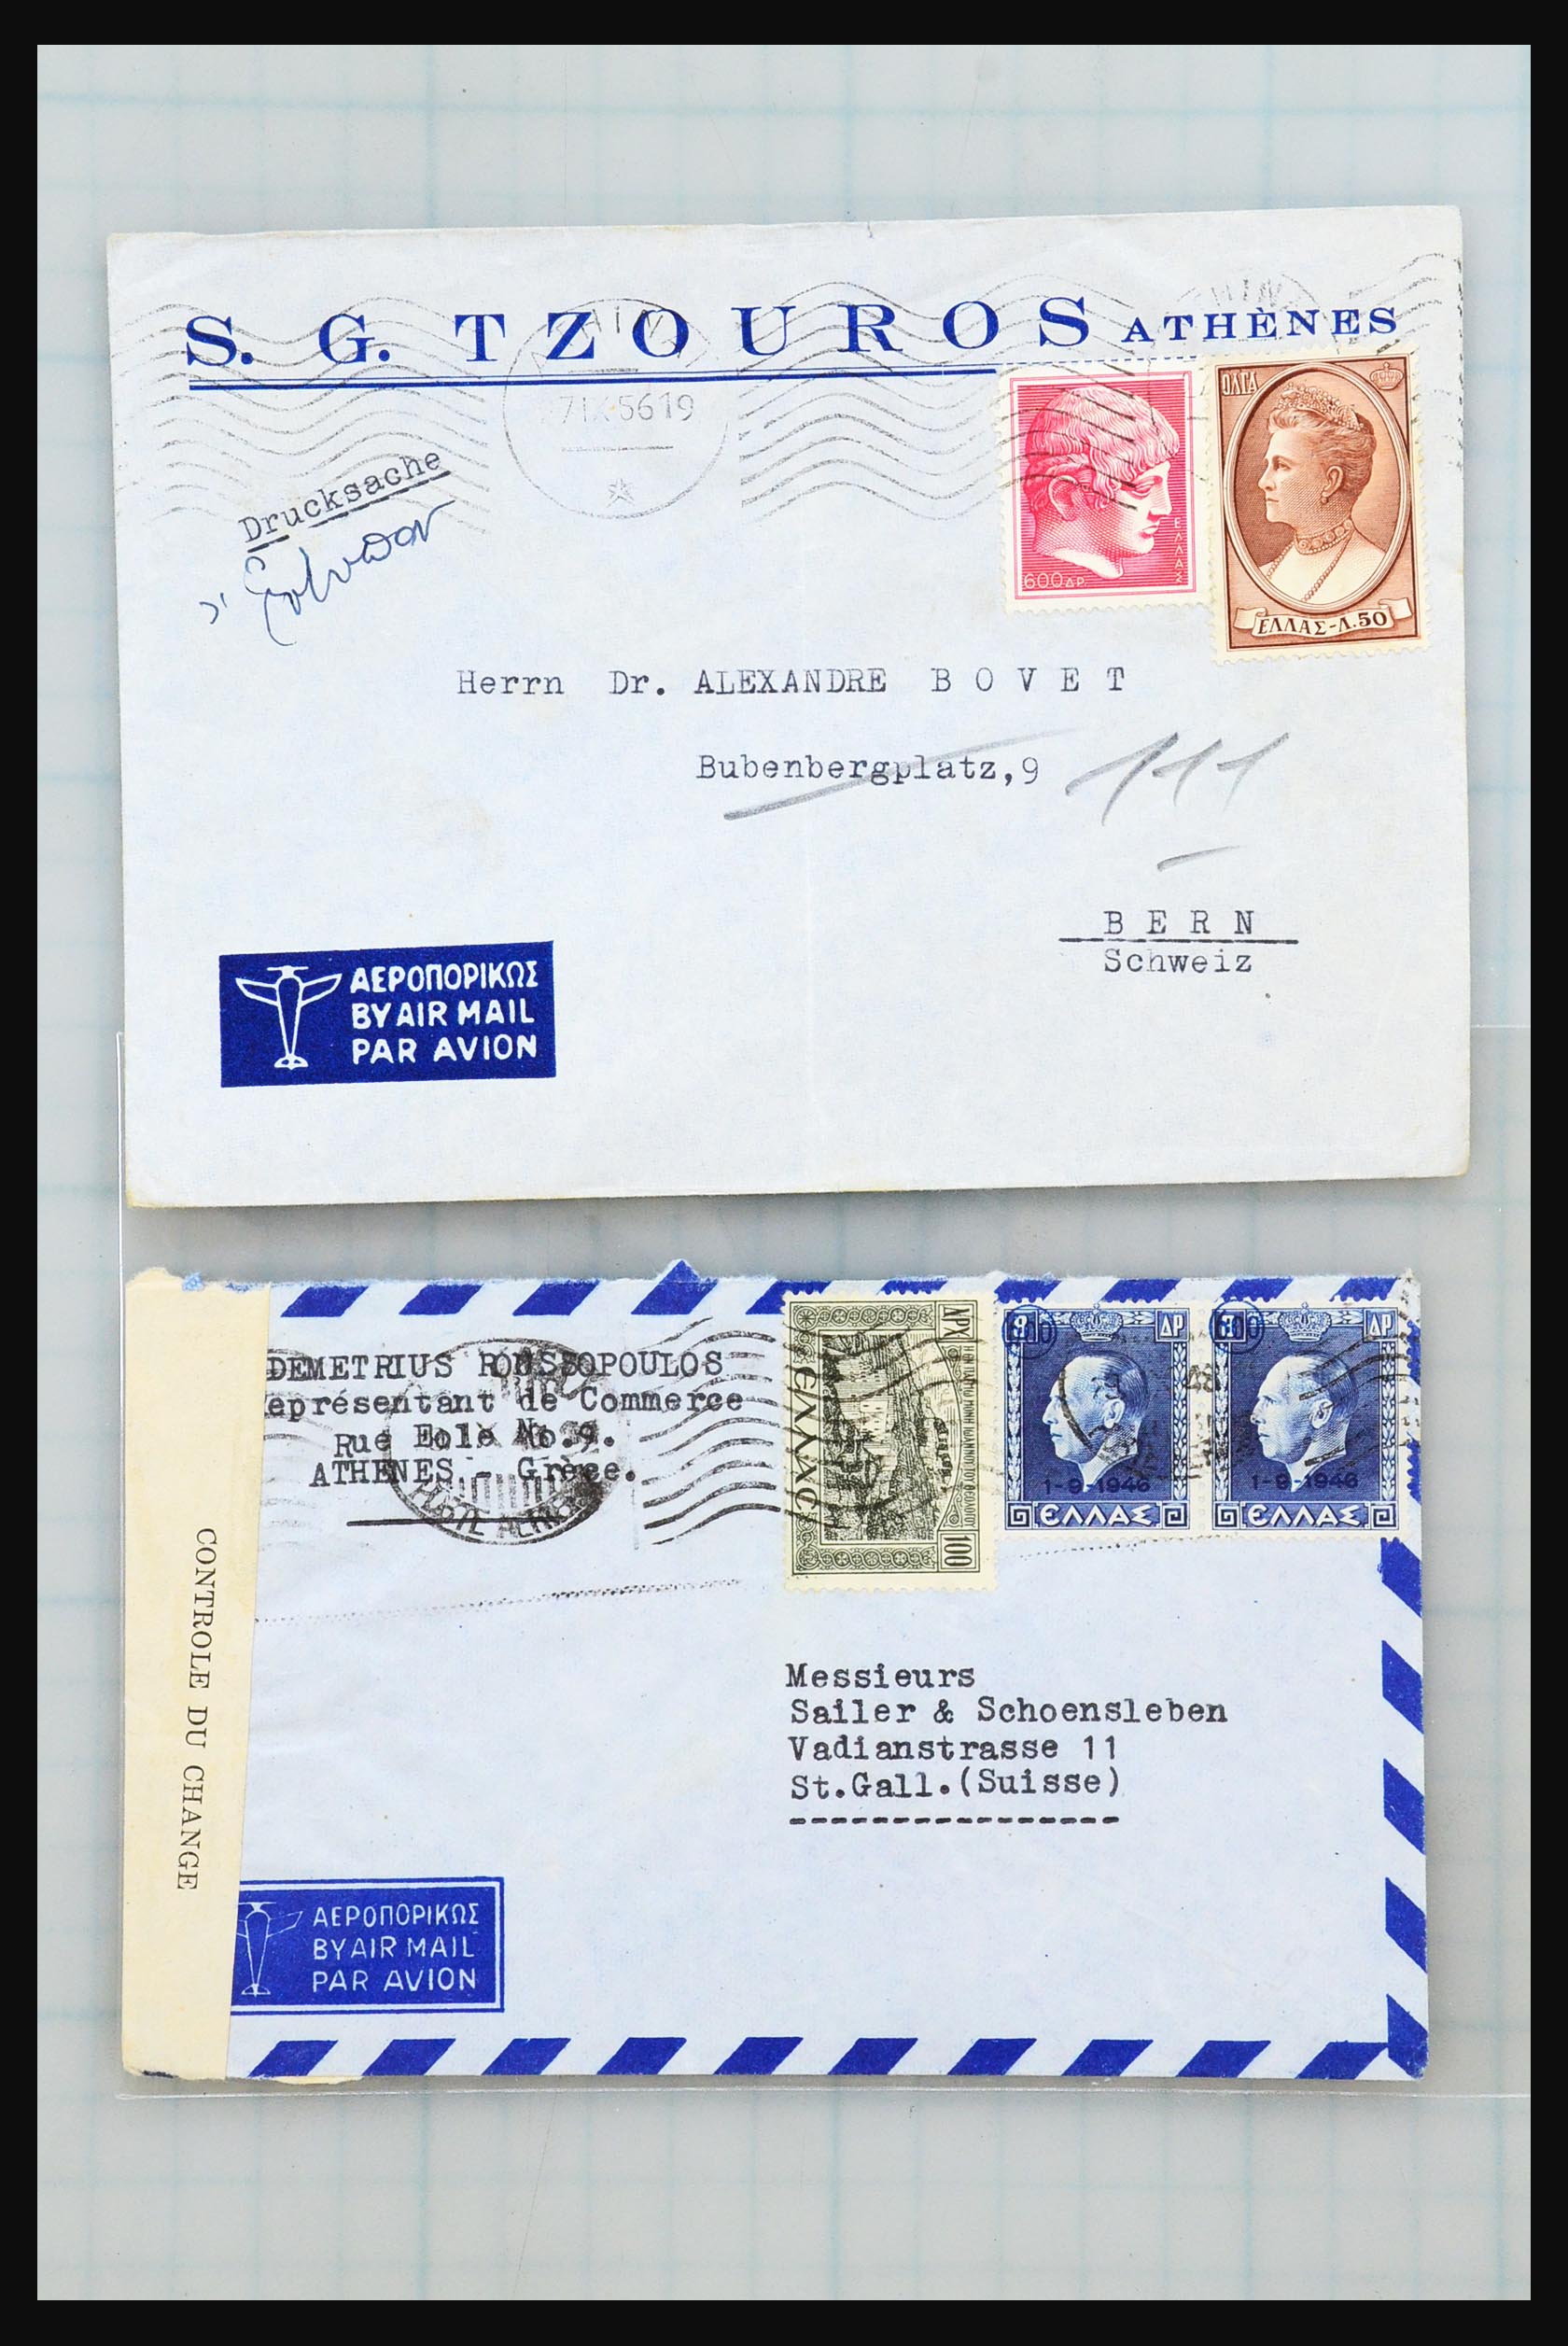 31358 012 - 31358 Portugal/Luxemburg/Greece covers 1880-1960.